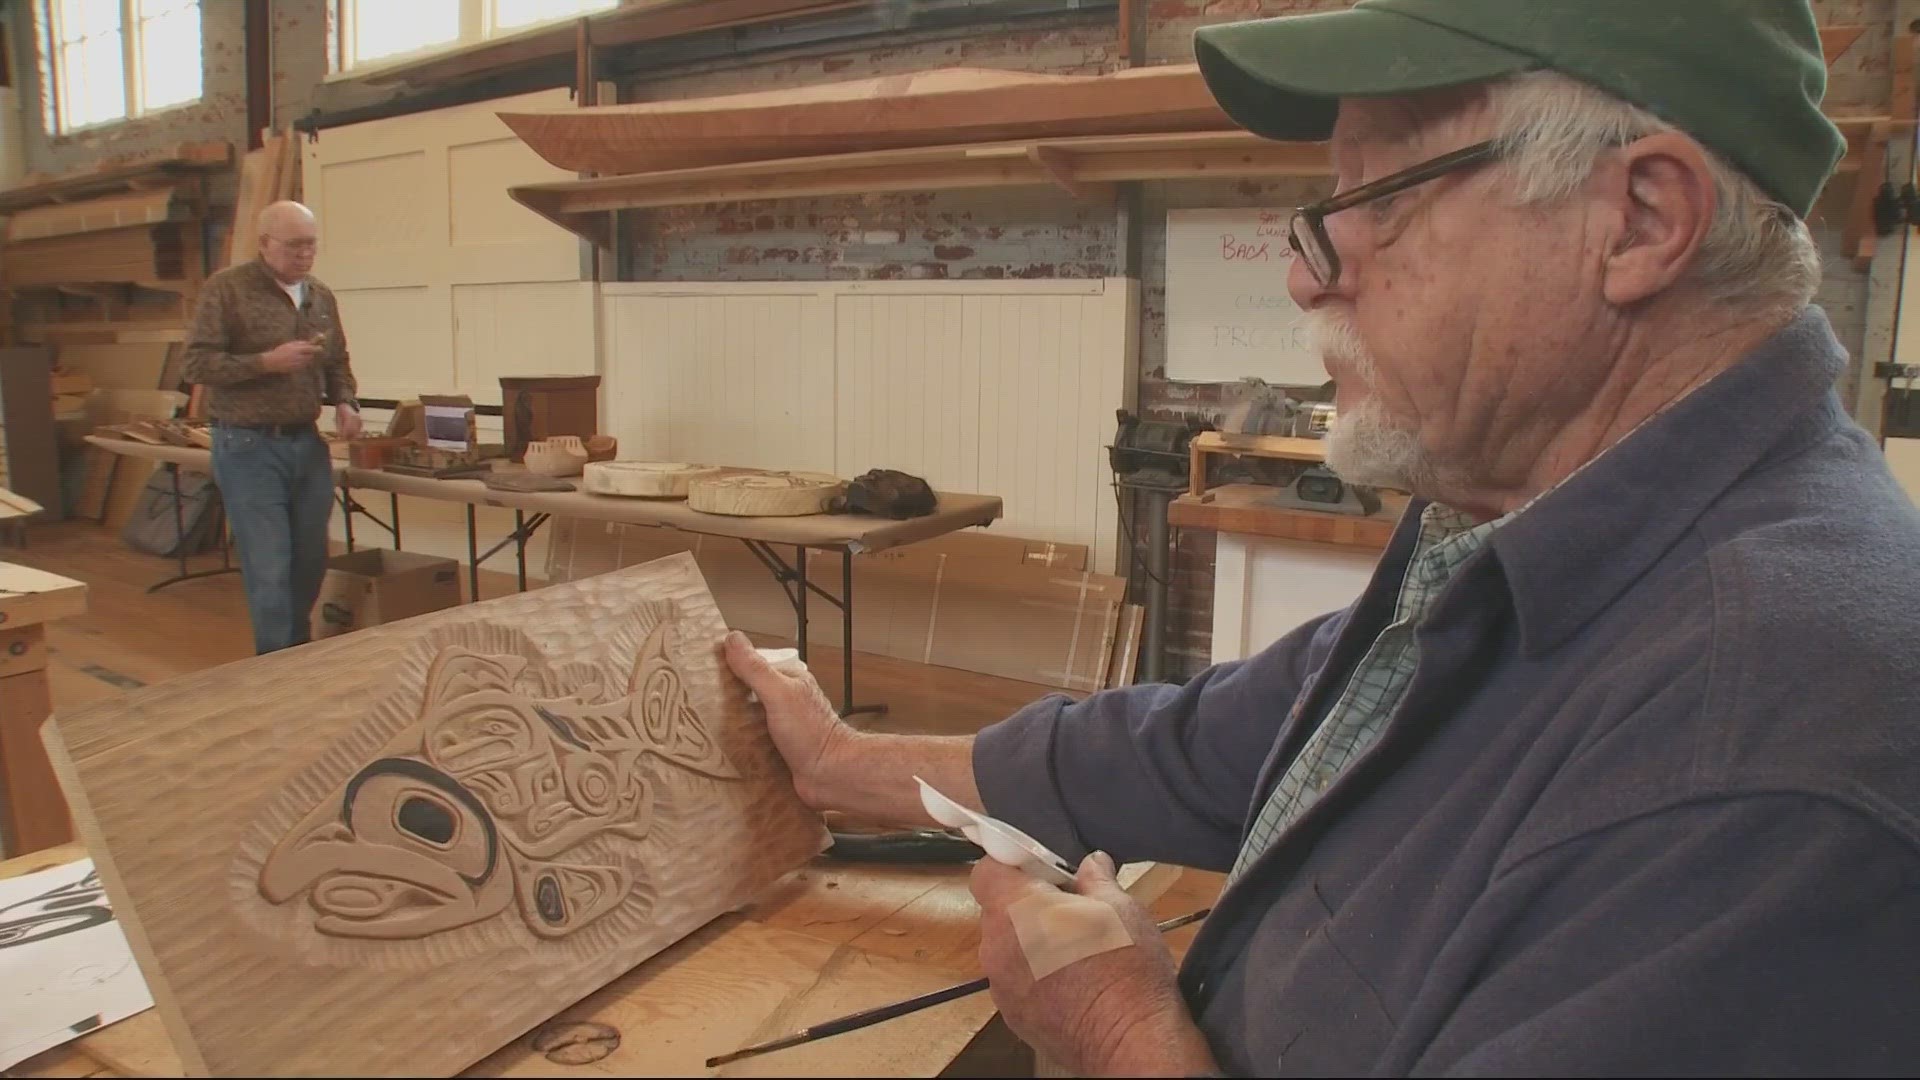 Astoria teacher takes a block of cedar and ancient carving tools to create amazing artwork that reaches across the centuries.